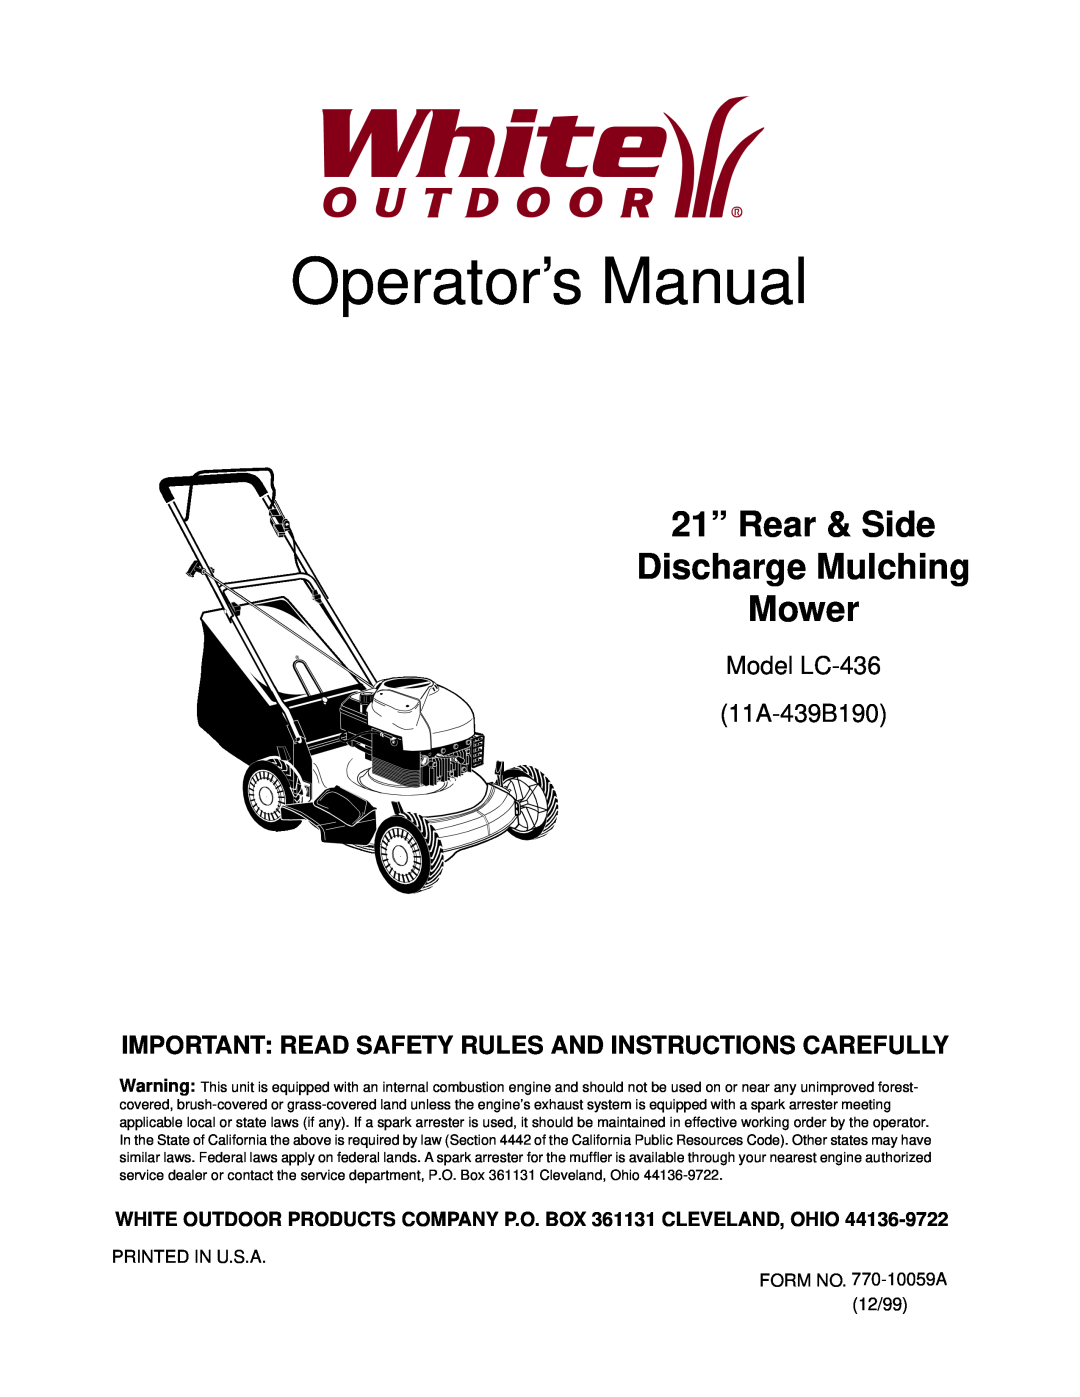 White Outdoor LC-436 manual WHITE OUTDOOR PRODUCTS COMPANY P.O. BOX 361131 CLEVELAND, OHIO, Operator’s Manual 